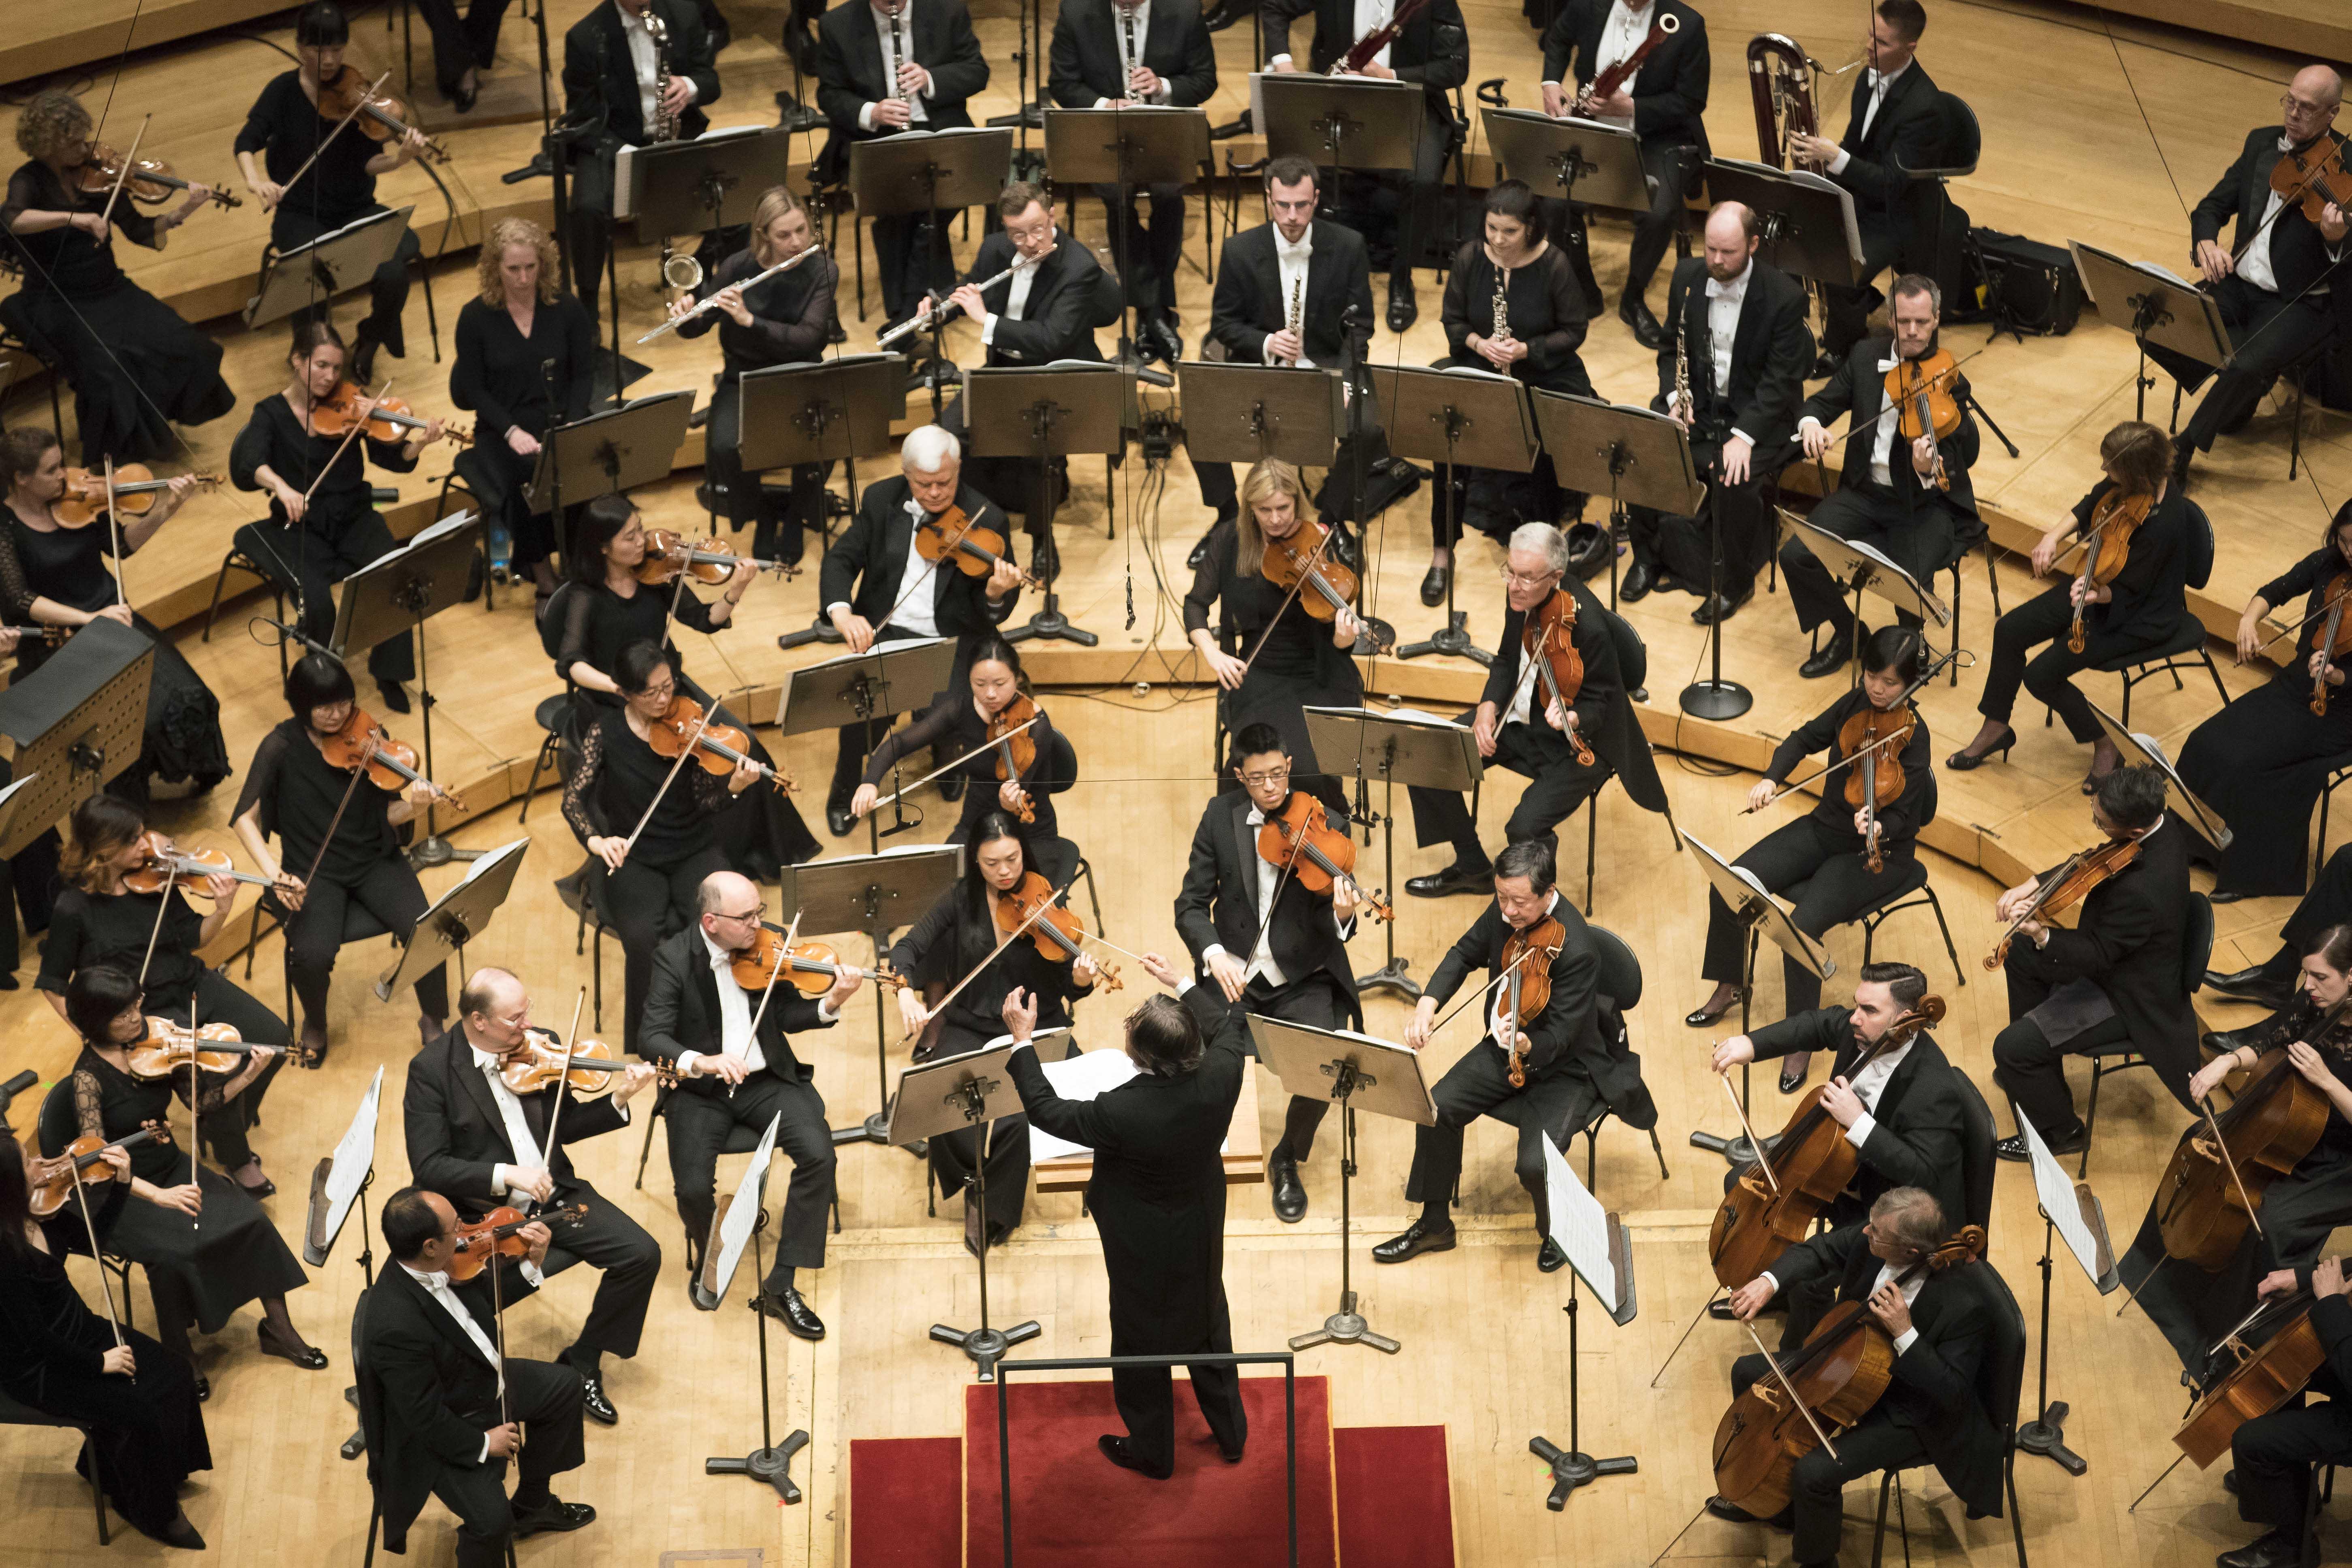 Music Director Riccardo Muti leads the CSO in Prokofiev’s Symphony No. 3. (Credit: Todd Rosenberg Photography)